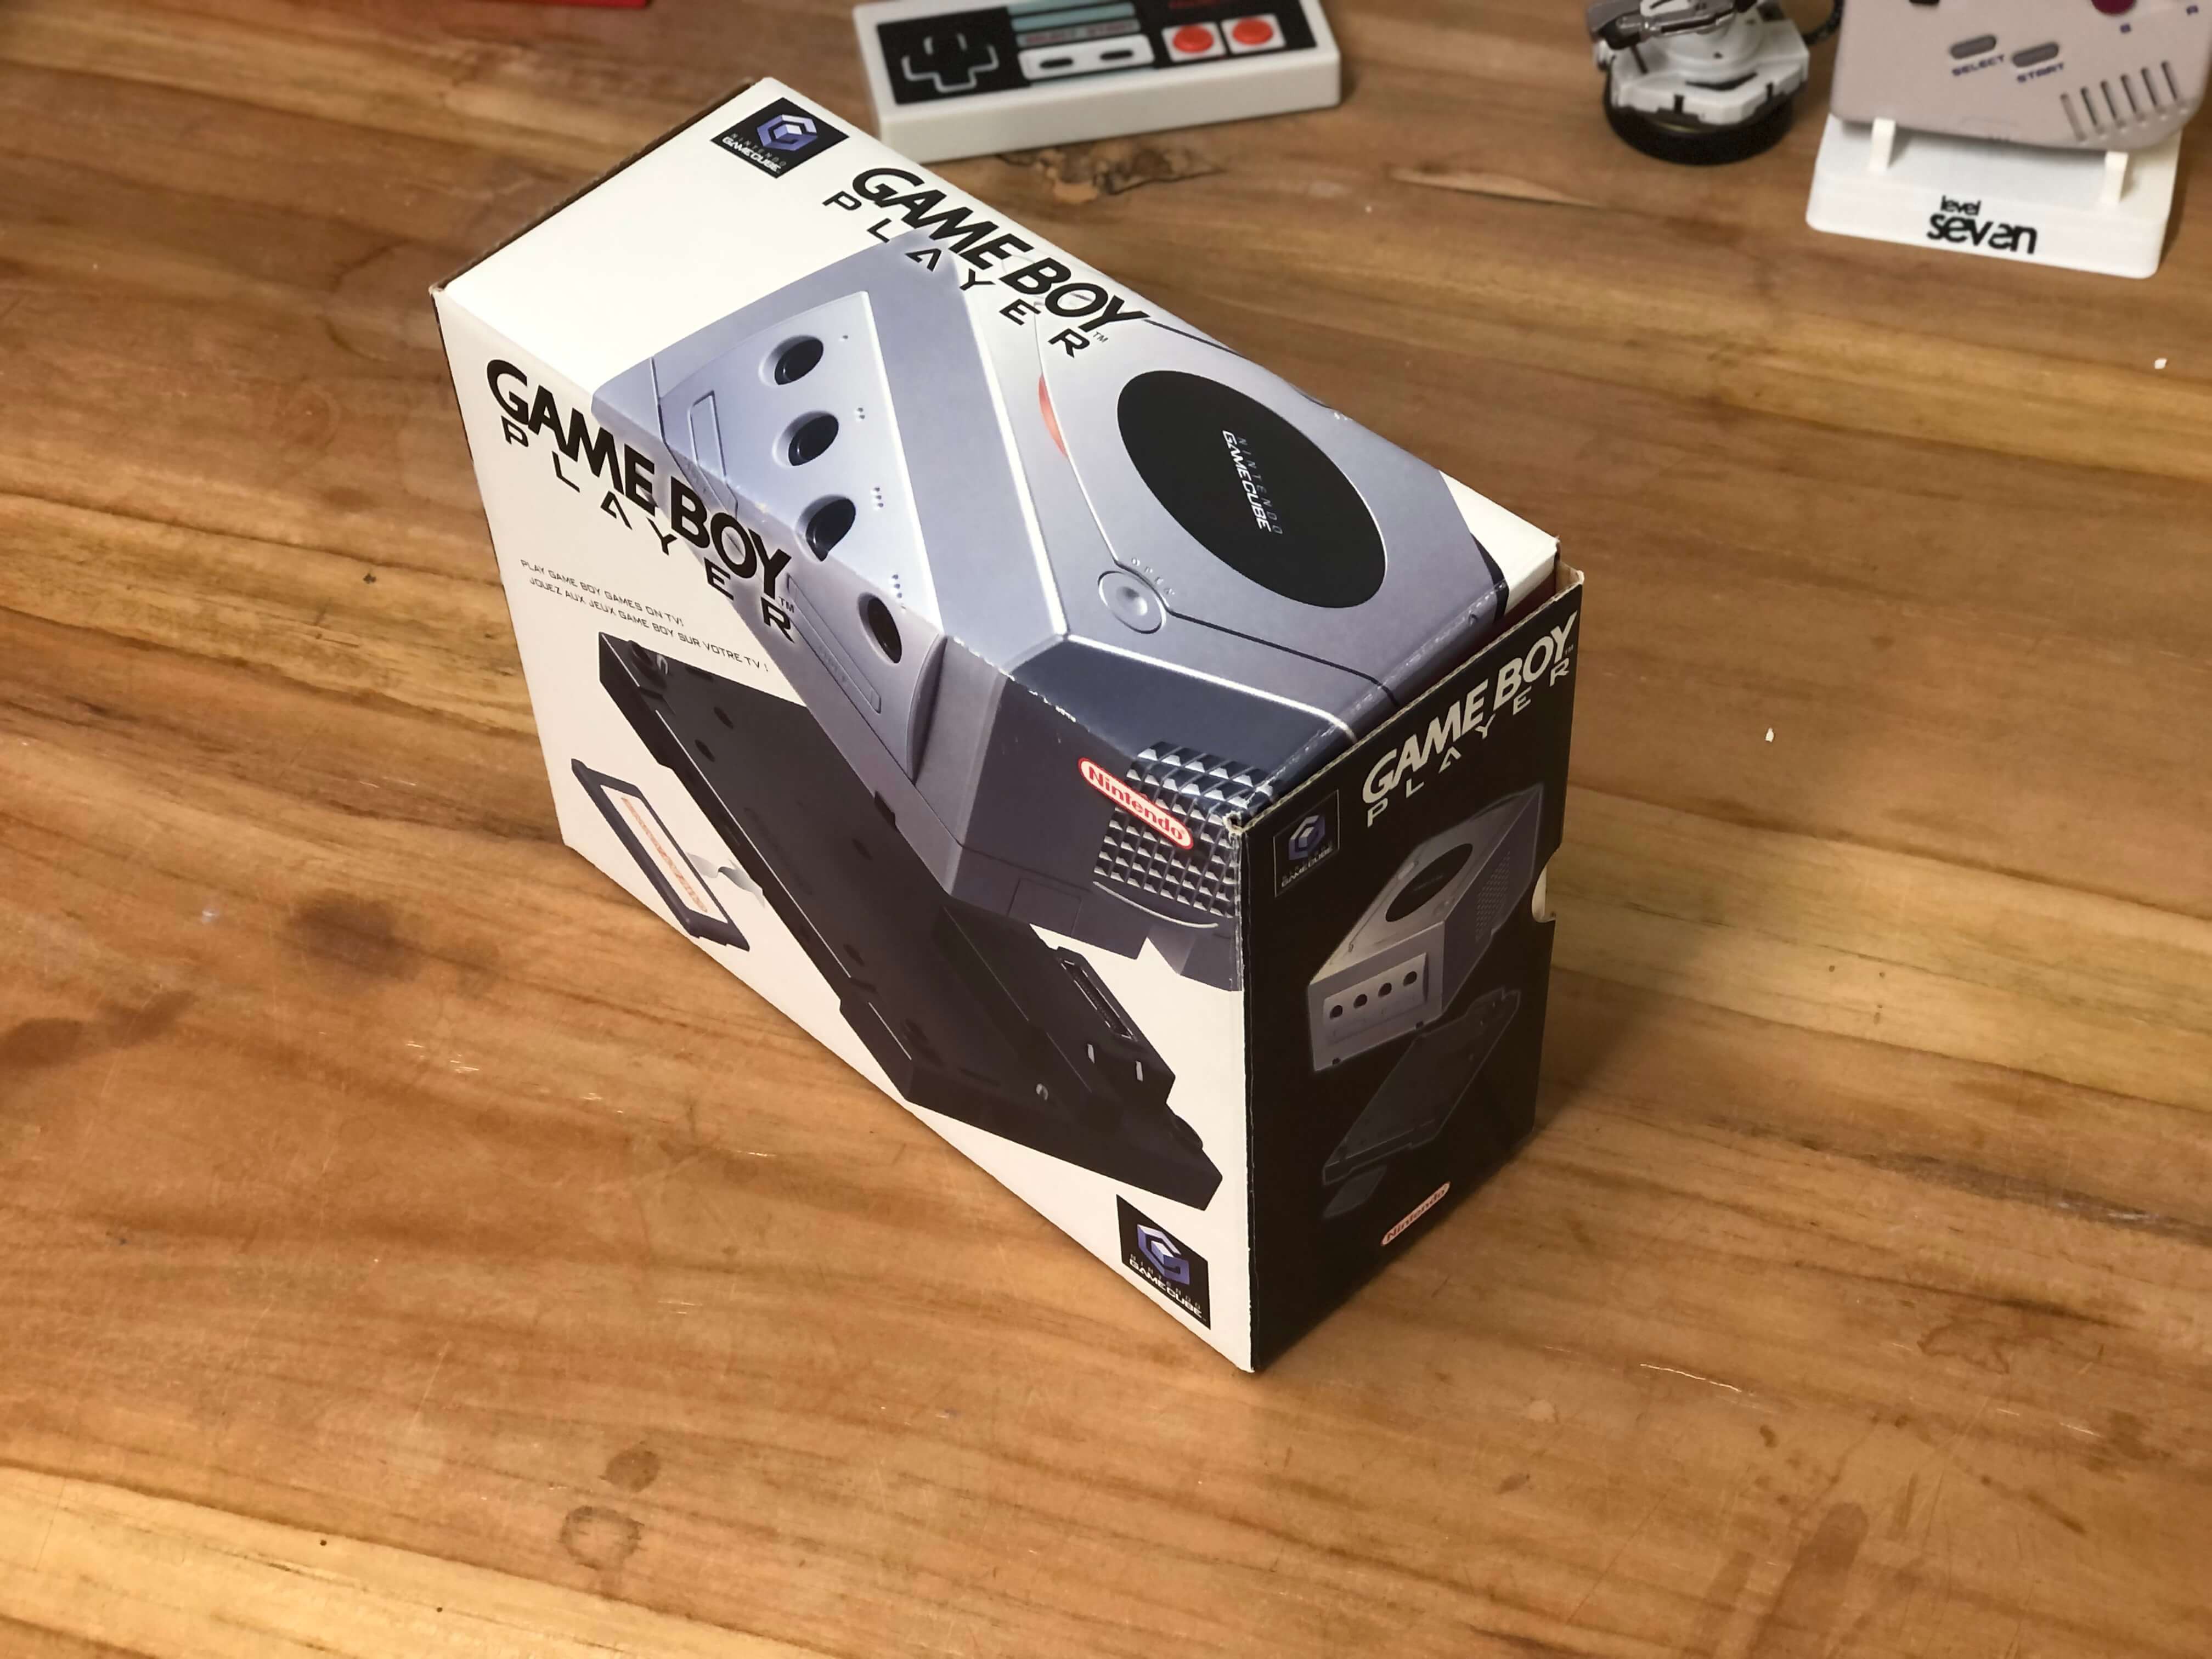 Nintendo Gamecube Gameboy Player [With Disc] [Complete] - Gamecube Hardware